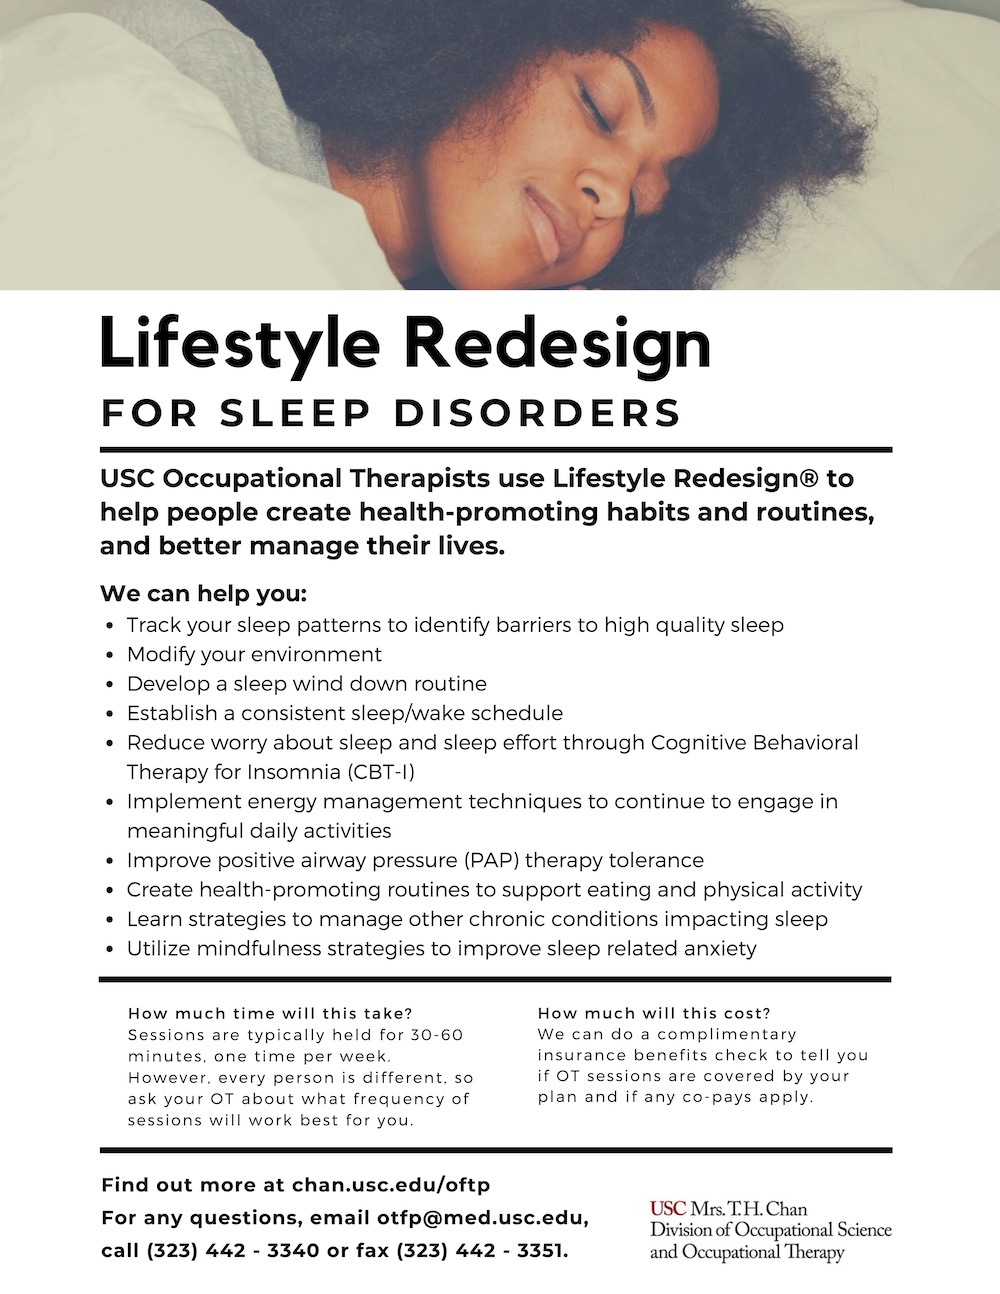 Lifestyle Redesign for Sleep Disorders